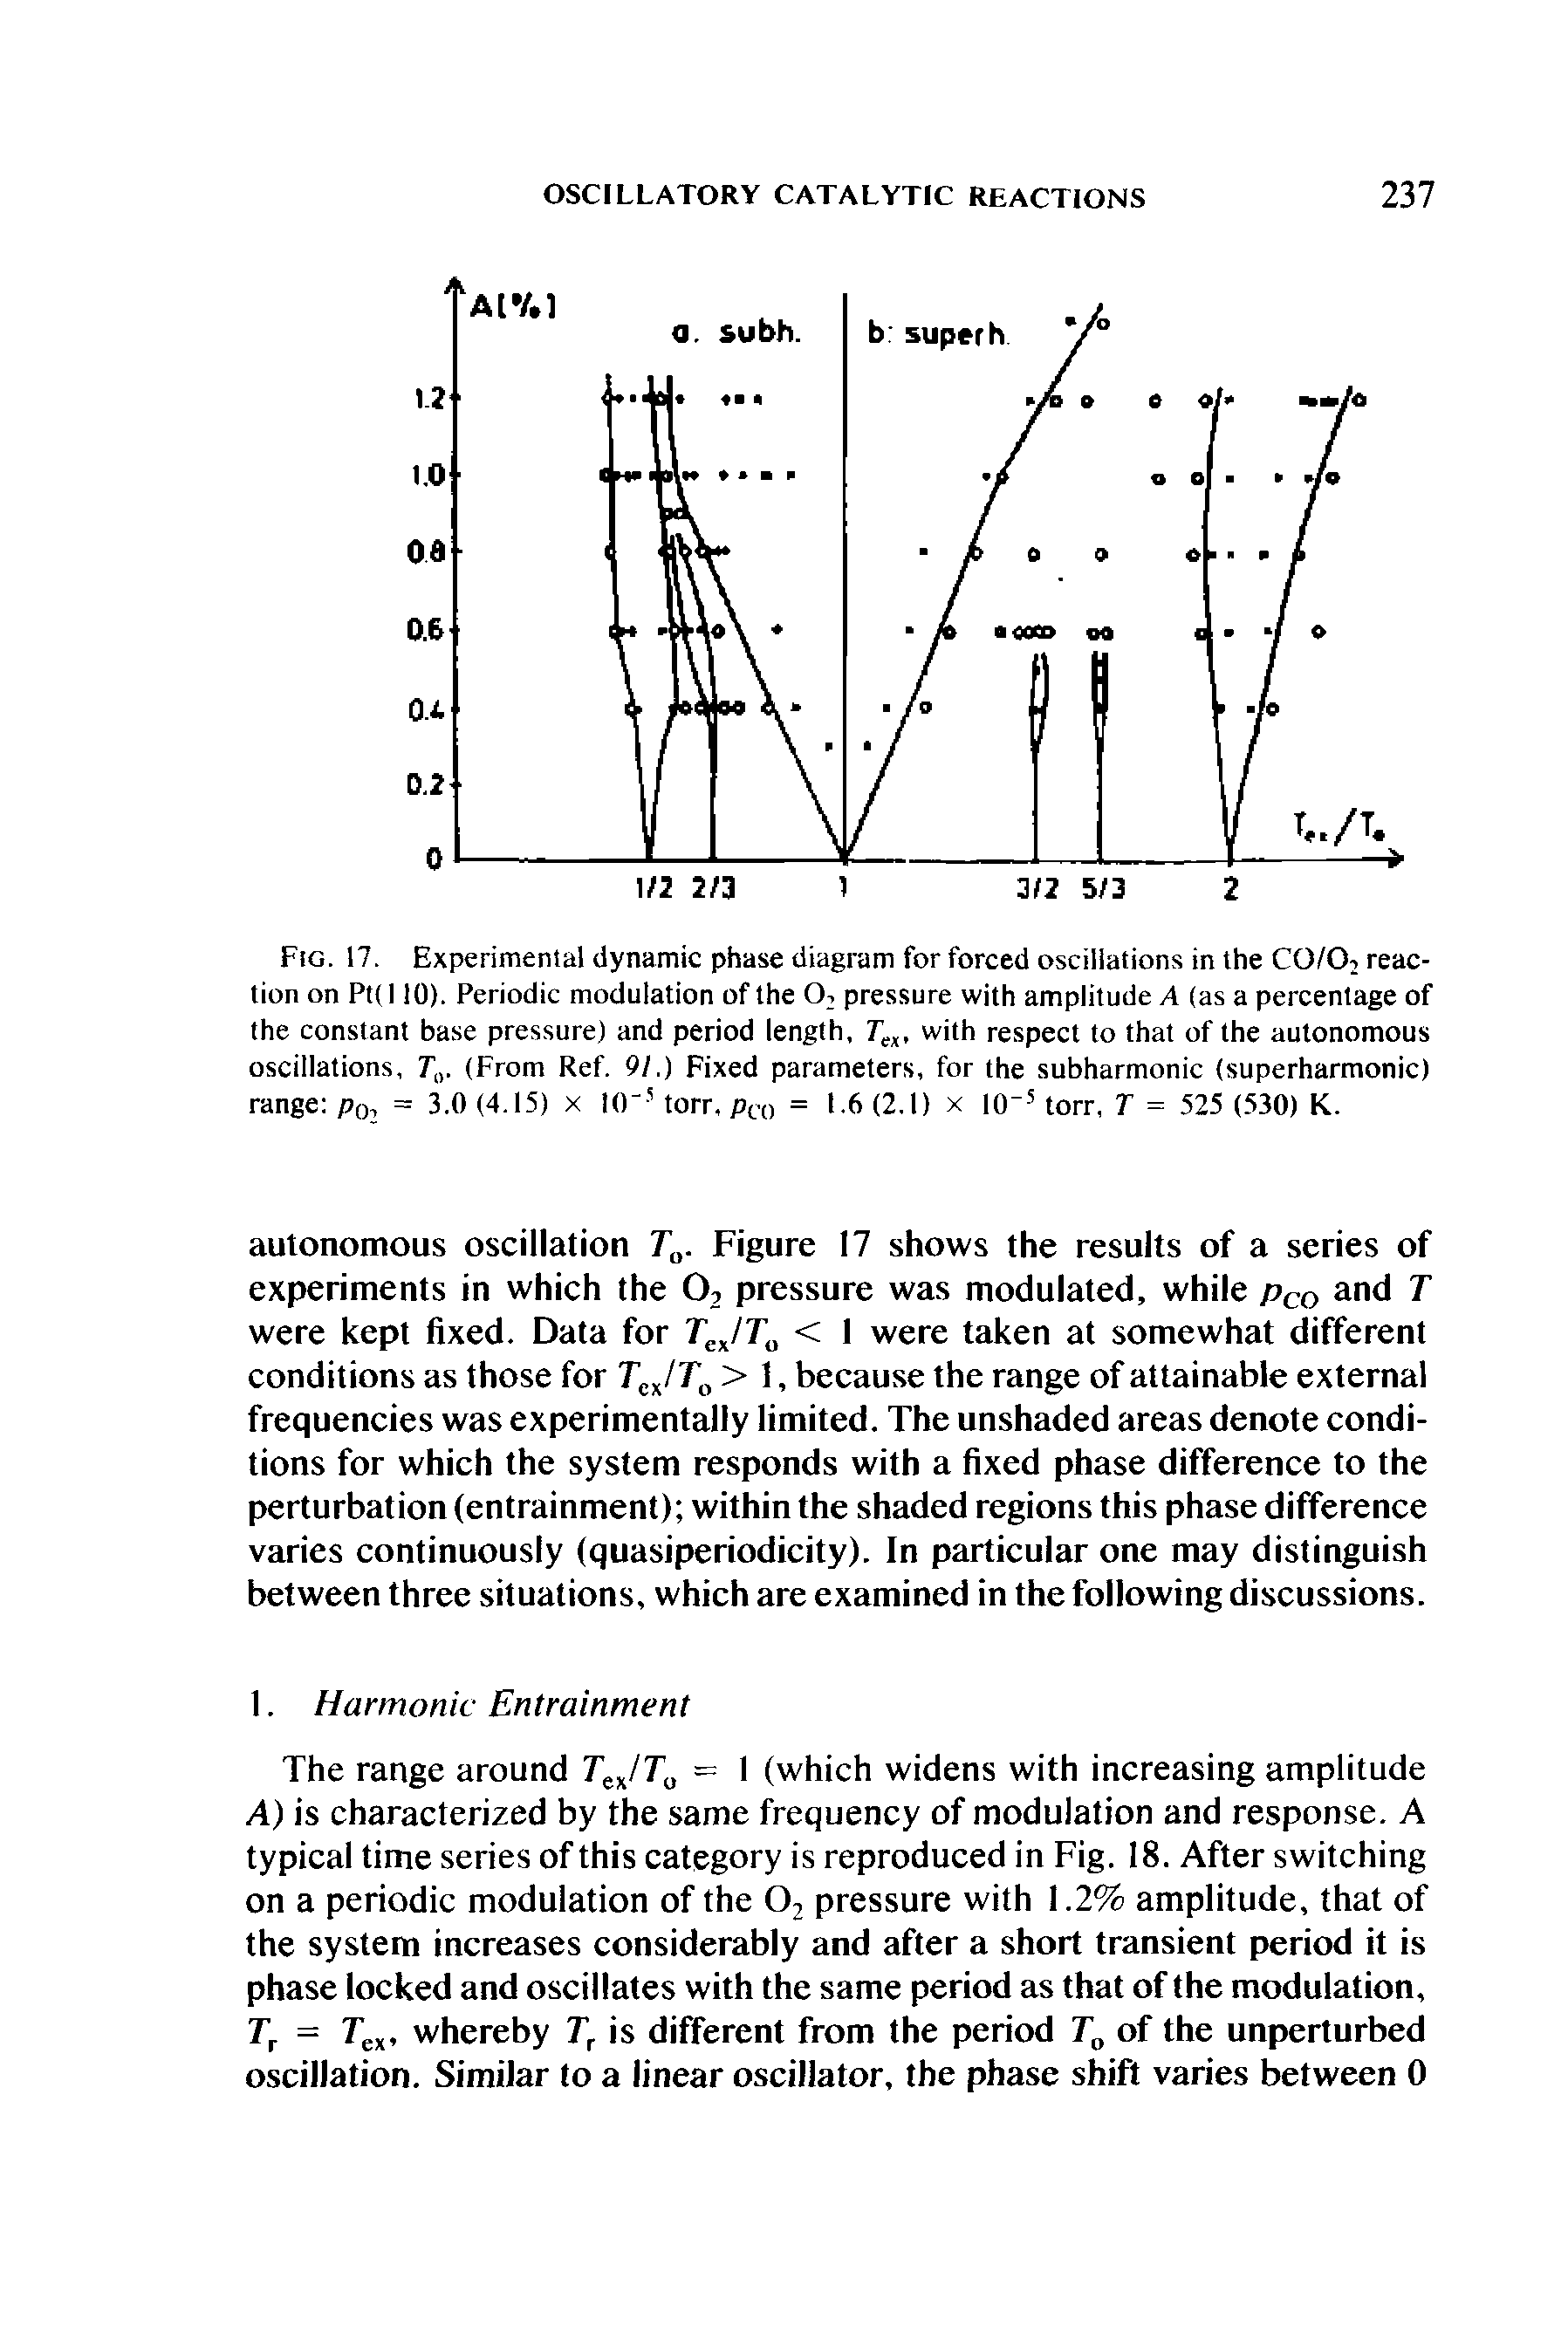 Fig. 17. Experimental dynamic phase diagram for forced oscillations in the CO/O, reaction on Pt(l 10). Periodic modulation of the 02 pressure with amplitude A (as a percentage of the constant base pressure) and period length, Tex, with respect to that of the autonomous oscillations, T . (From Ref. 91.) Fixed parameters, for the subharmonic (superharmonic) range p(h = 3.0 (4.15) x 10 5 torr, p , = 1.6 (2.1) x 10 5 torr, T = 525 (530) K.